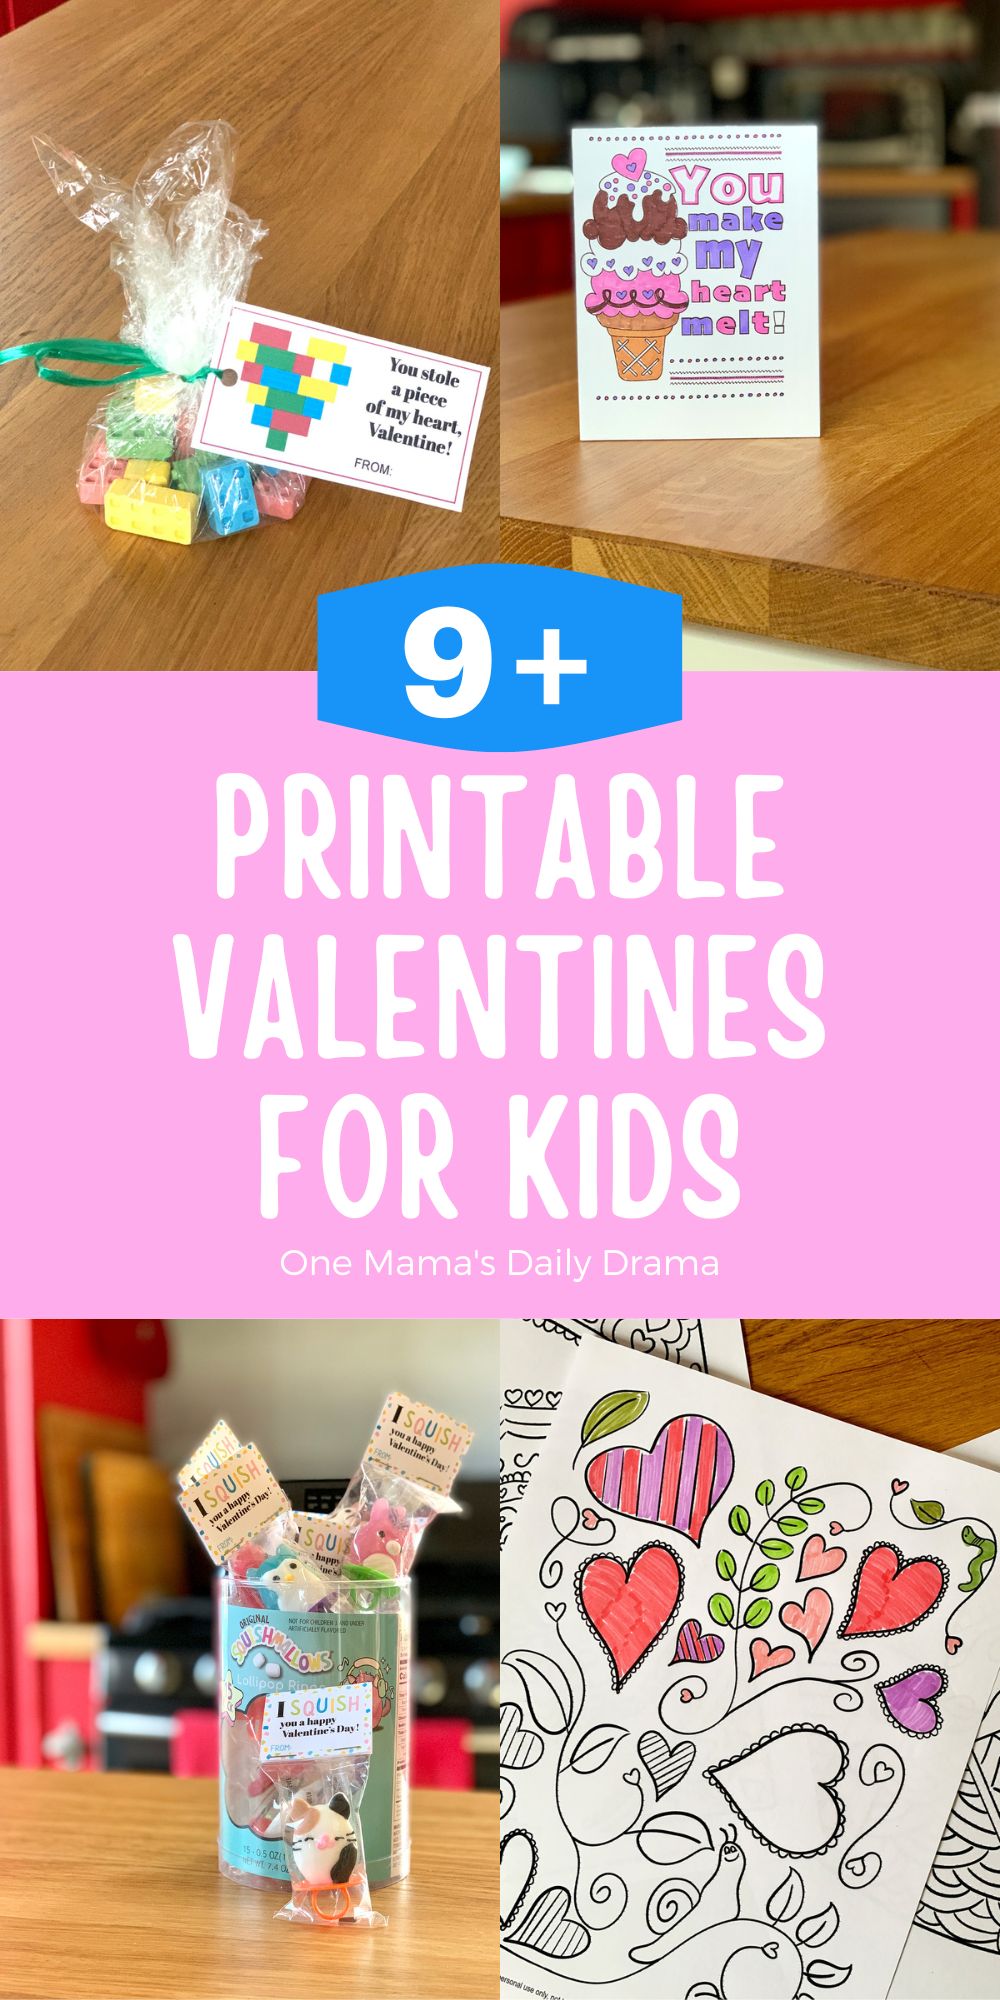 Fun printable valentines cards for kids teens and adults